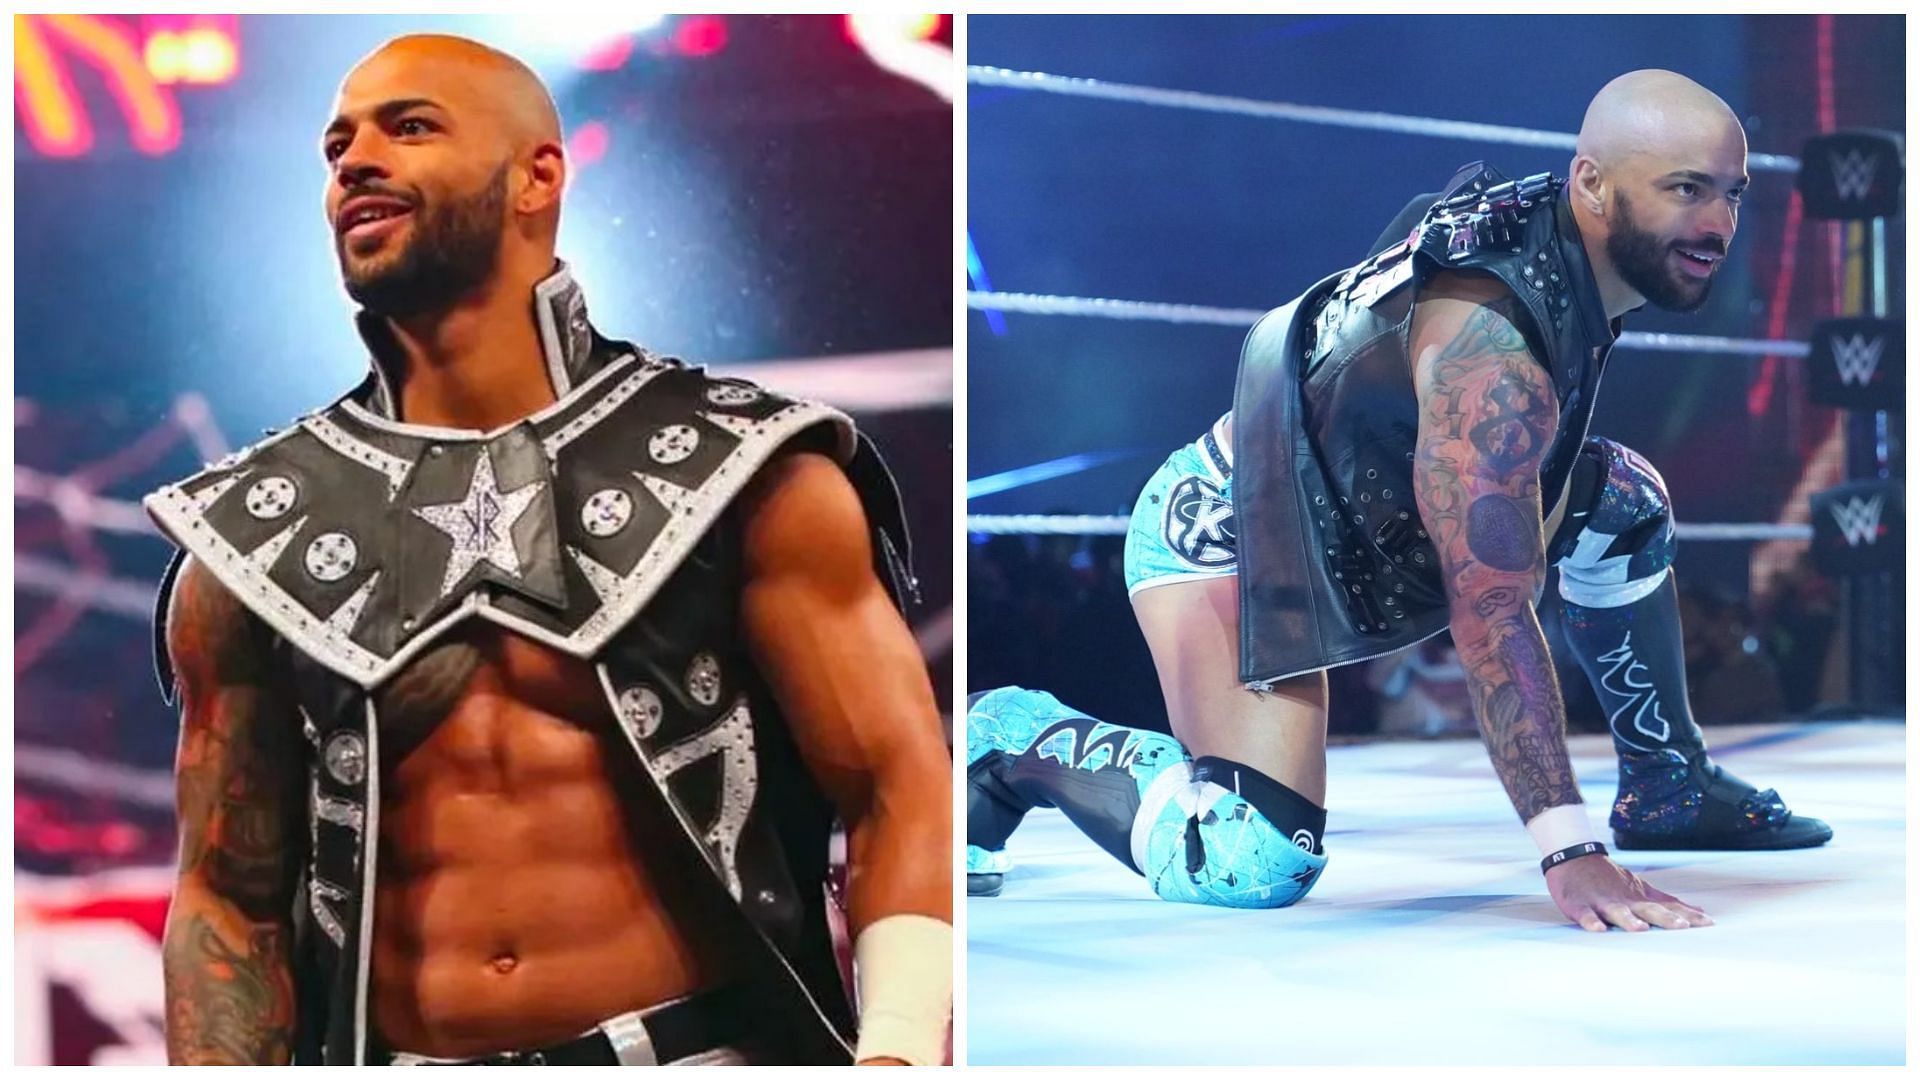 Ricochet is a former United States Champion and Intercontinental Champion.